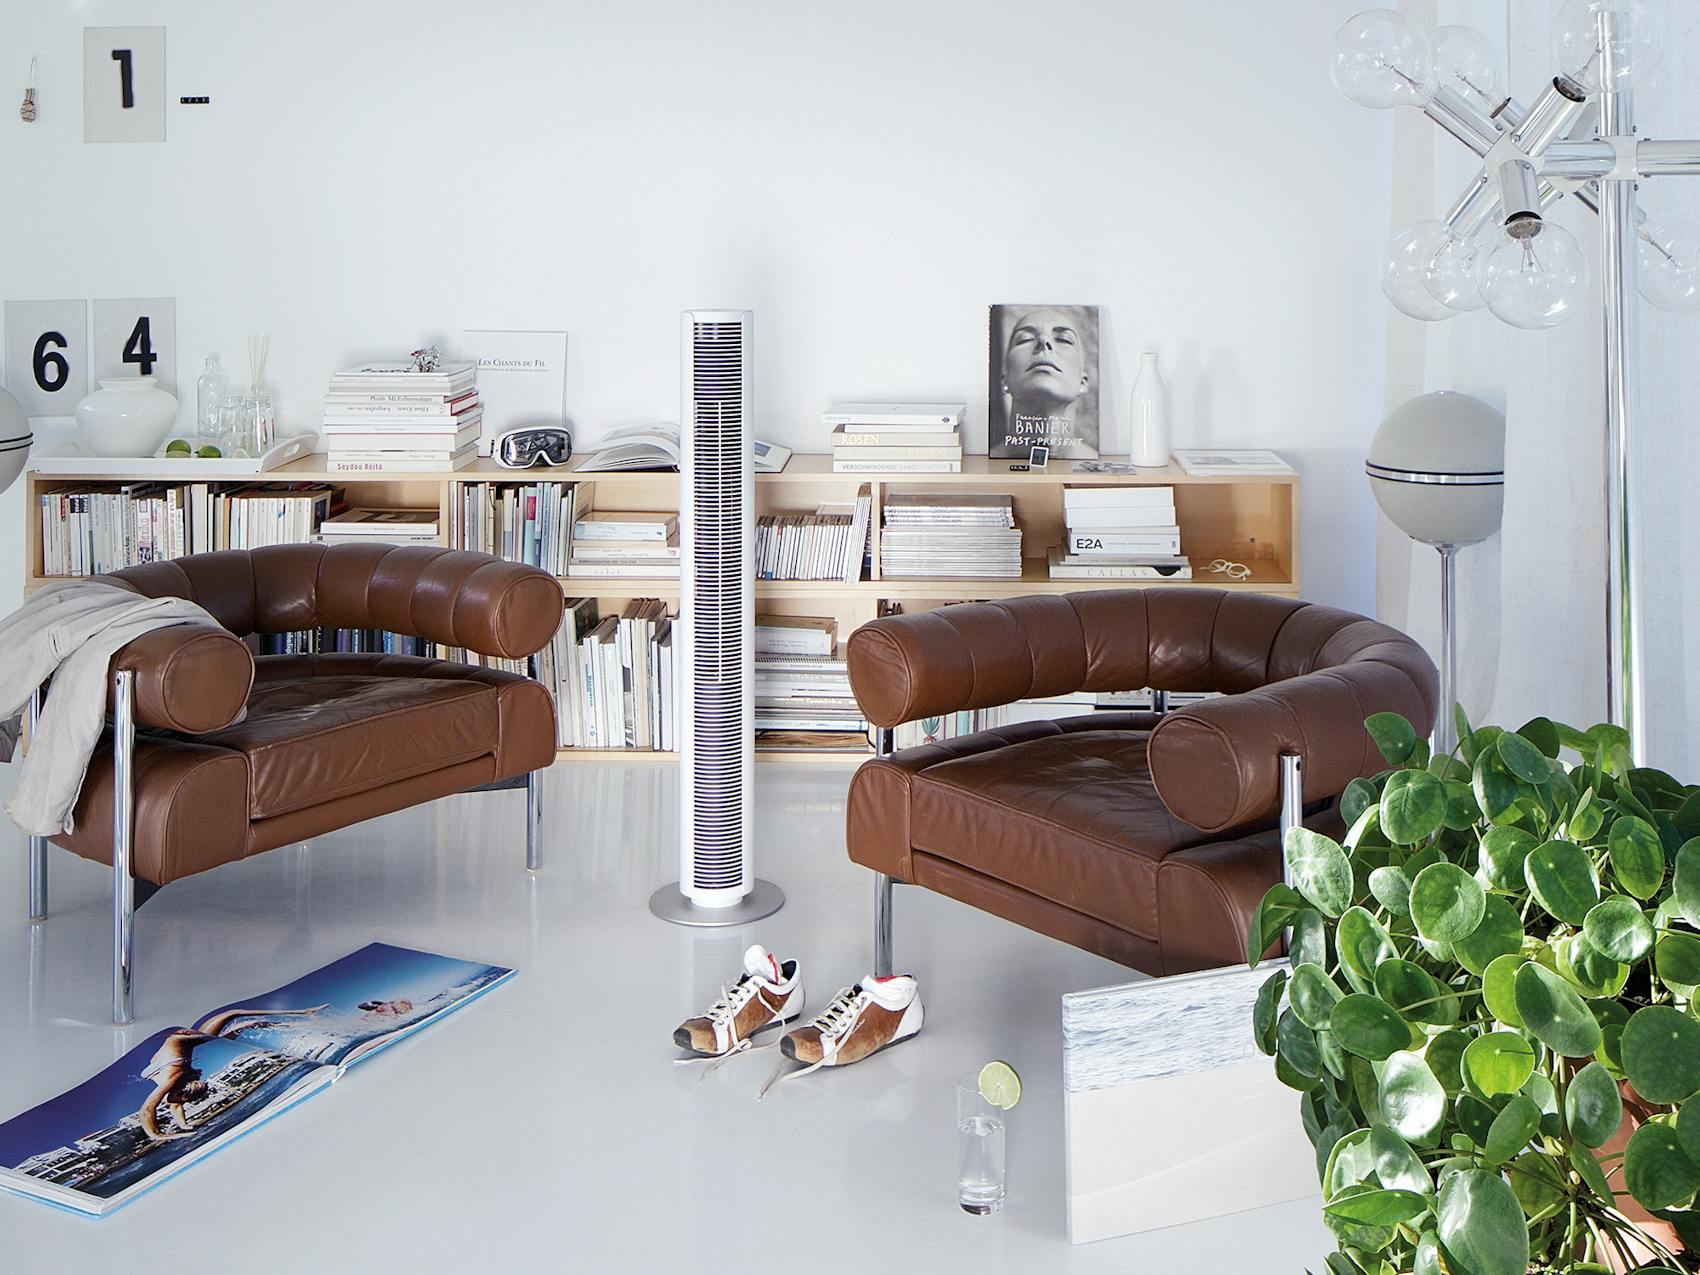 Peter tower fan by Stadler Form in white in a living room